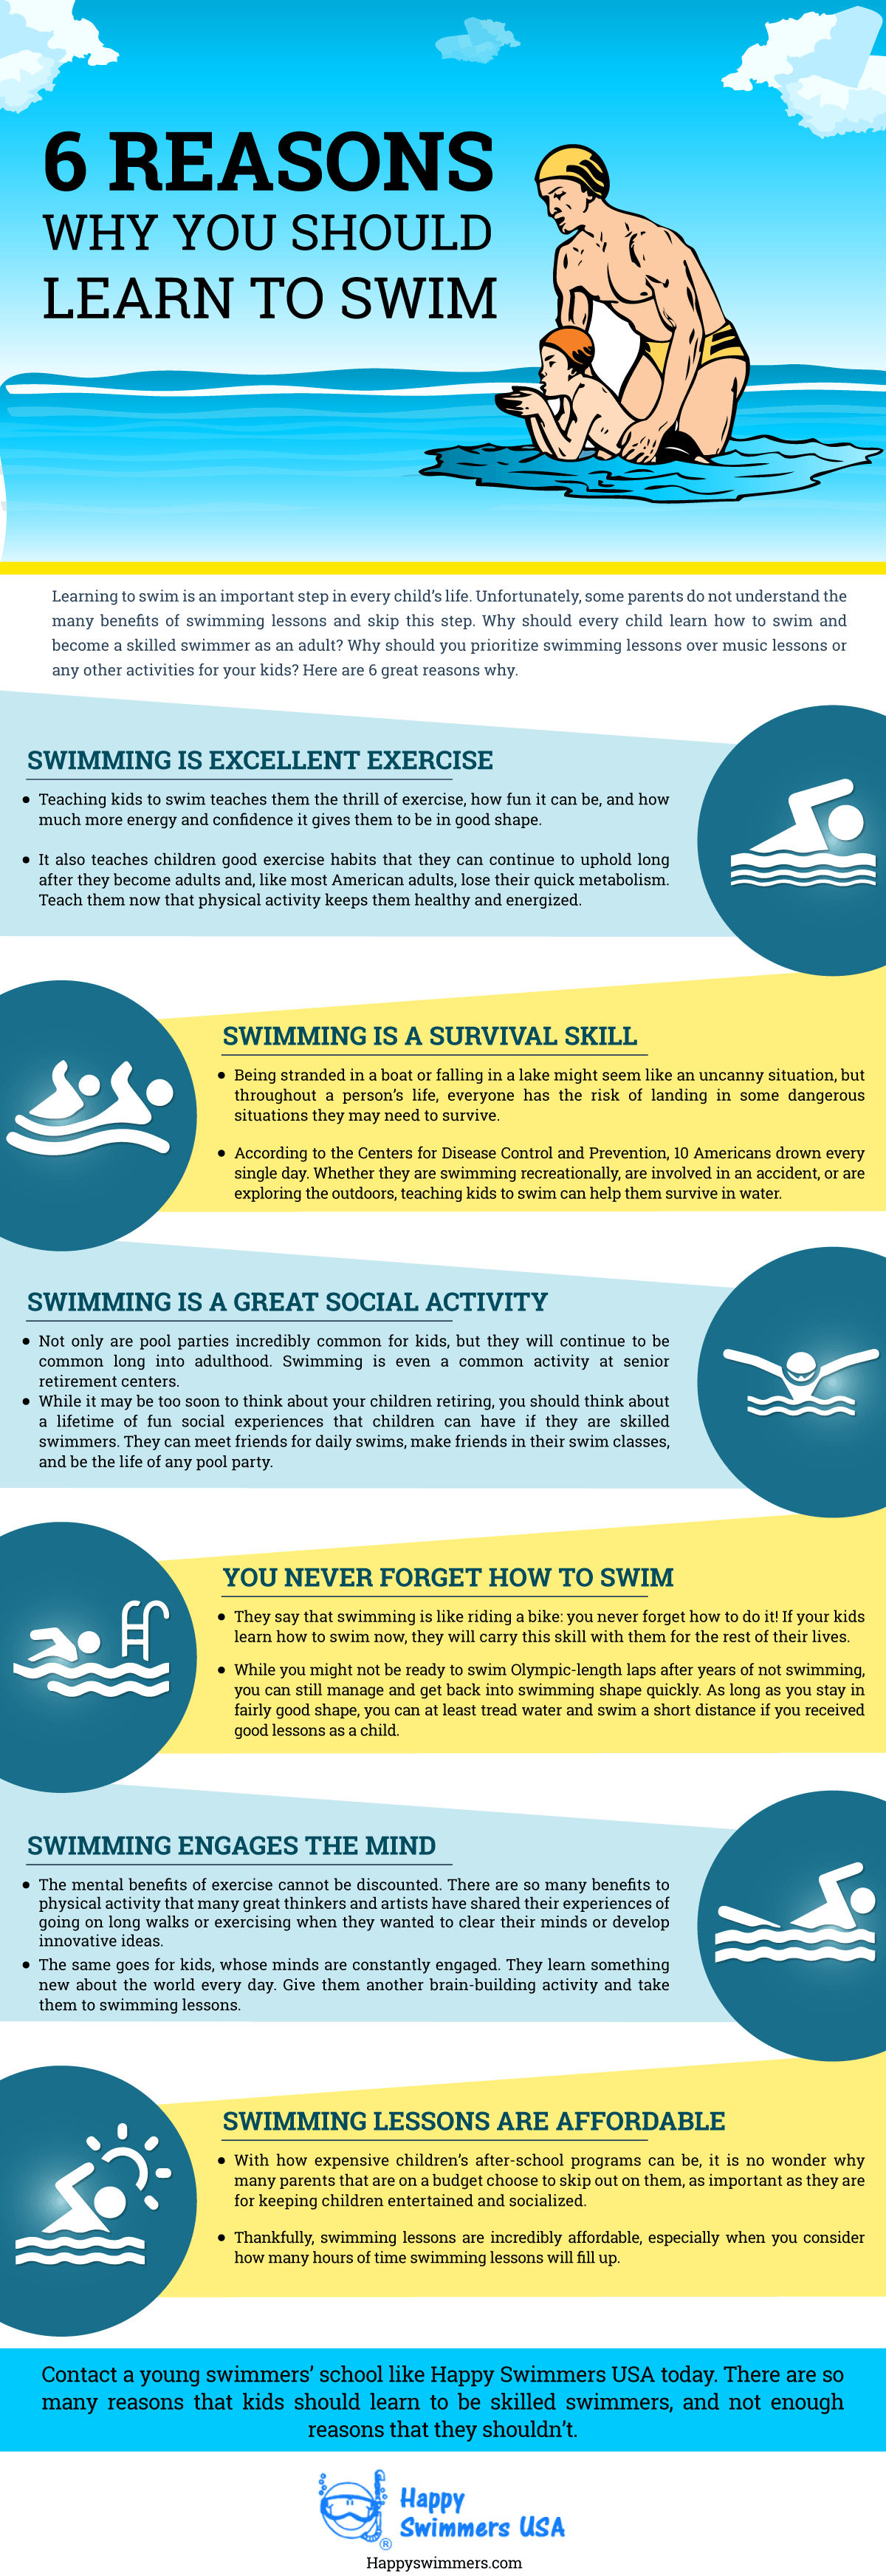 EDITED_HappySwimmersUSA_January_Infographic_1595794